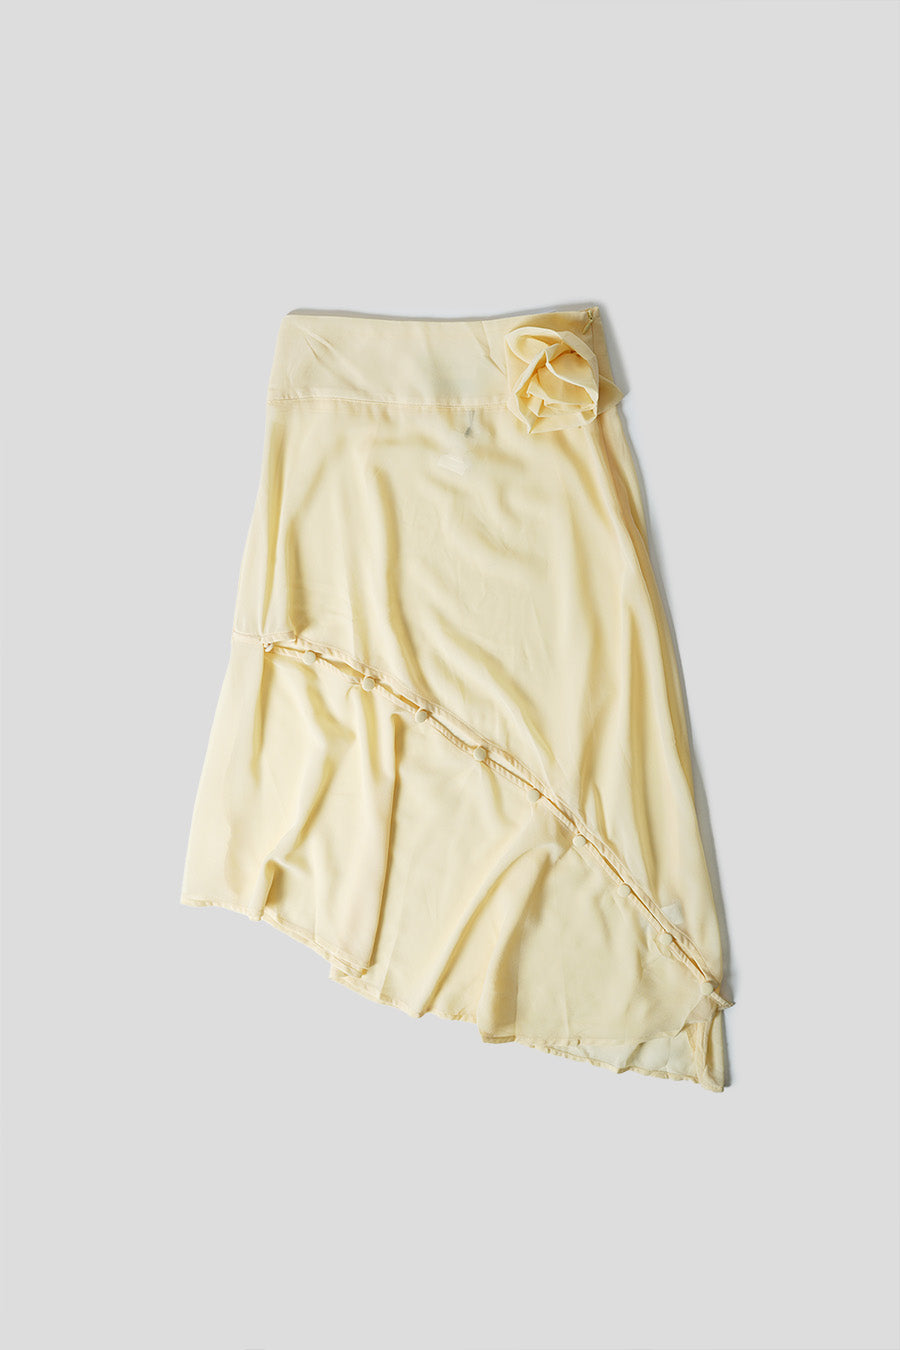 house of sunny - SKIRT IN BLOOM YELLOW - LE LABO STORE